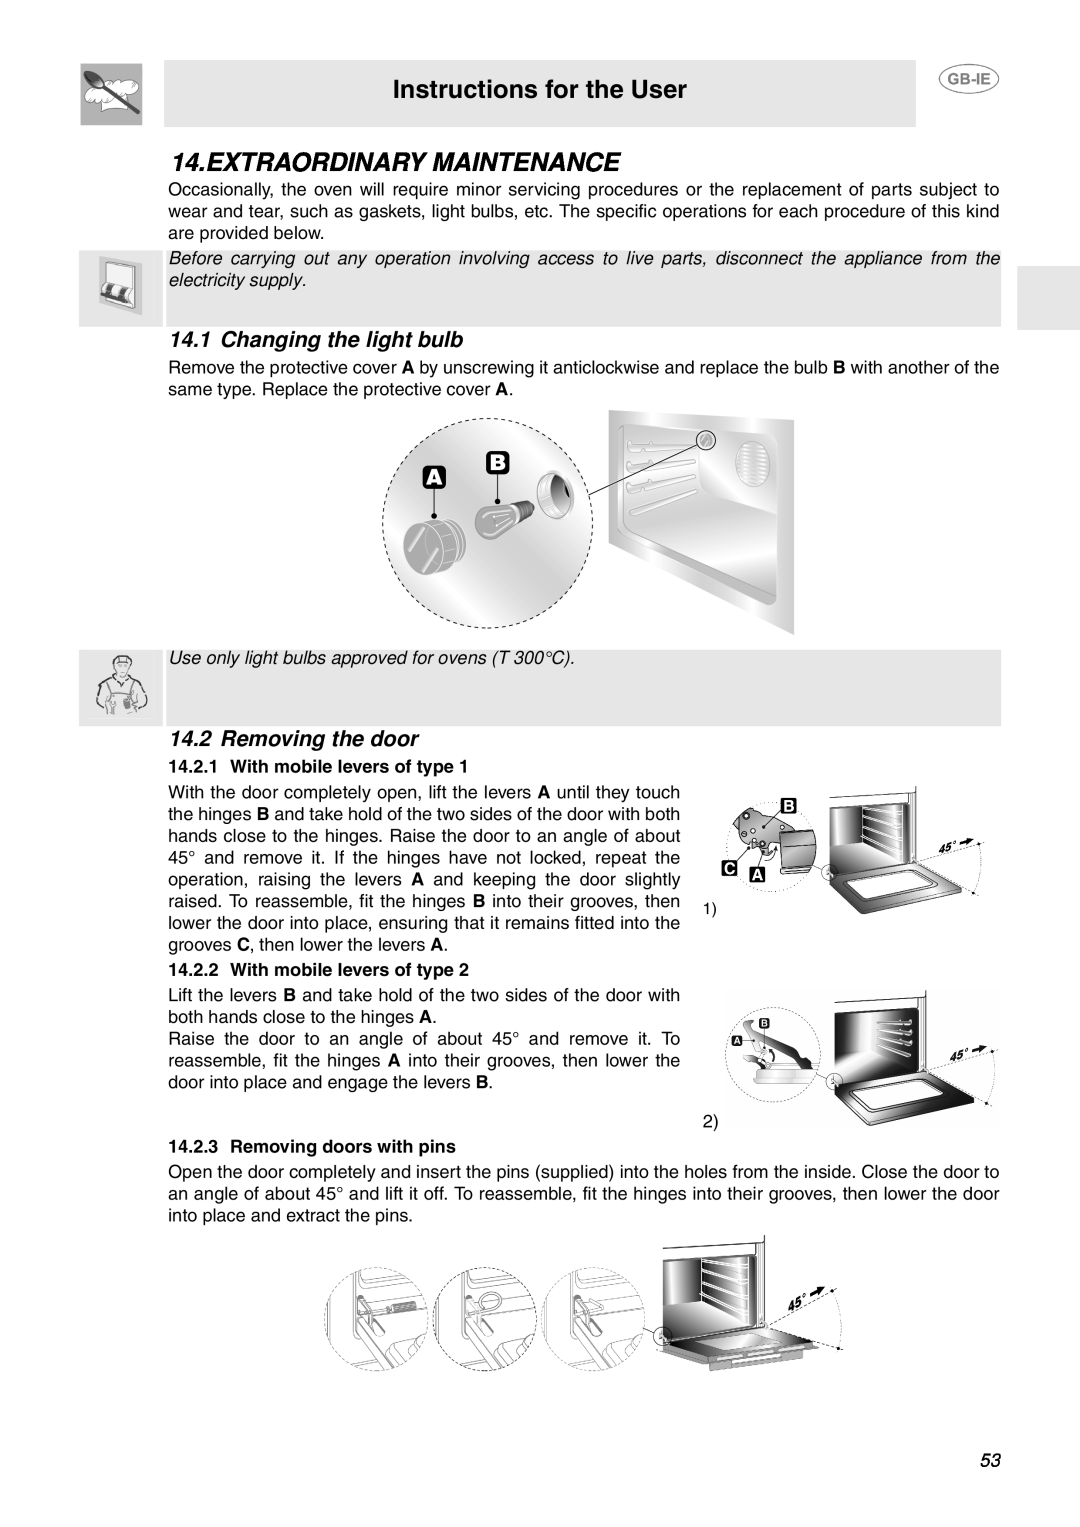 Smeg FP130N, FP130B manual Extraordinary Maintenance, Changing the light bulb, Removing the door, Instructions for the User 